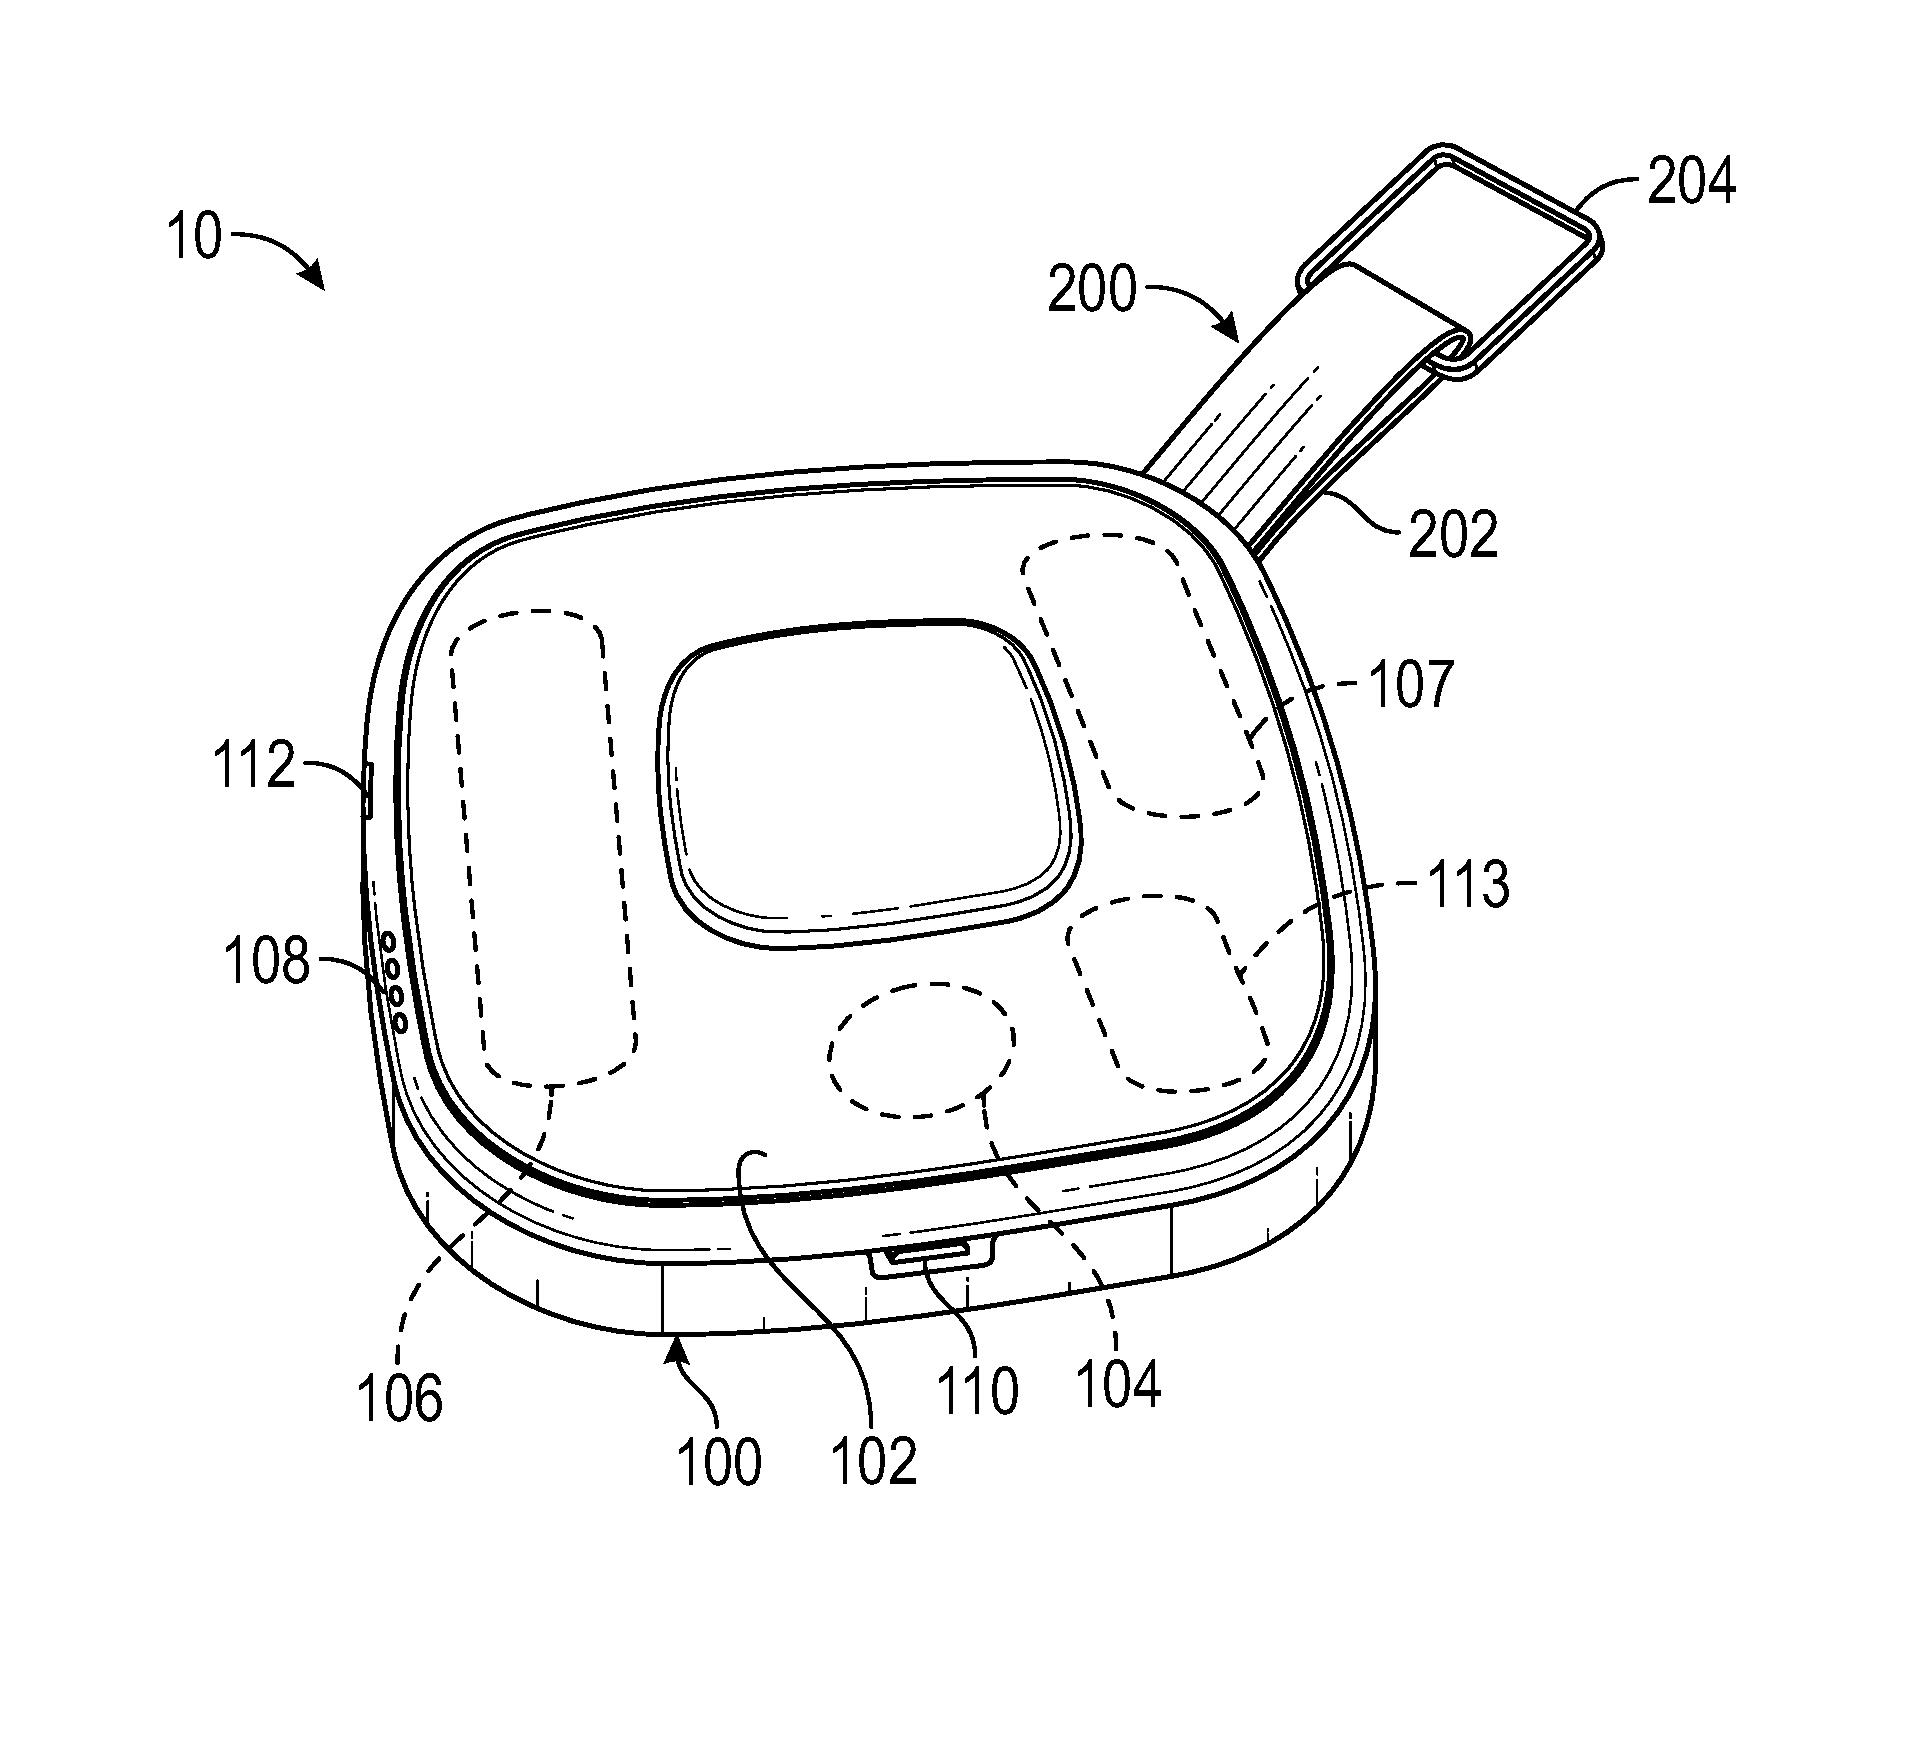 Decorative And Portable Power Charger With Motion Light Patent Grant 